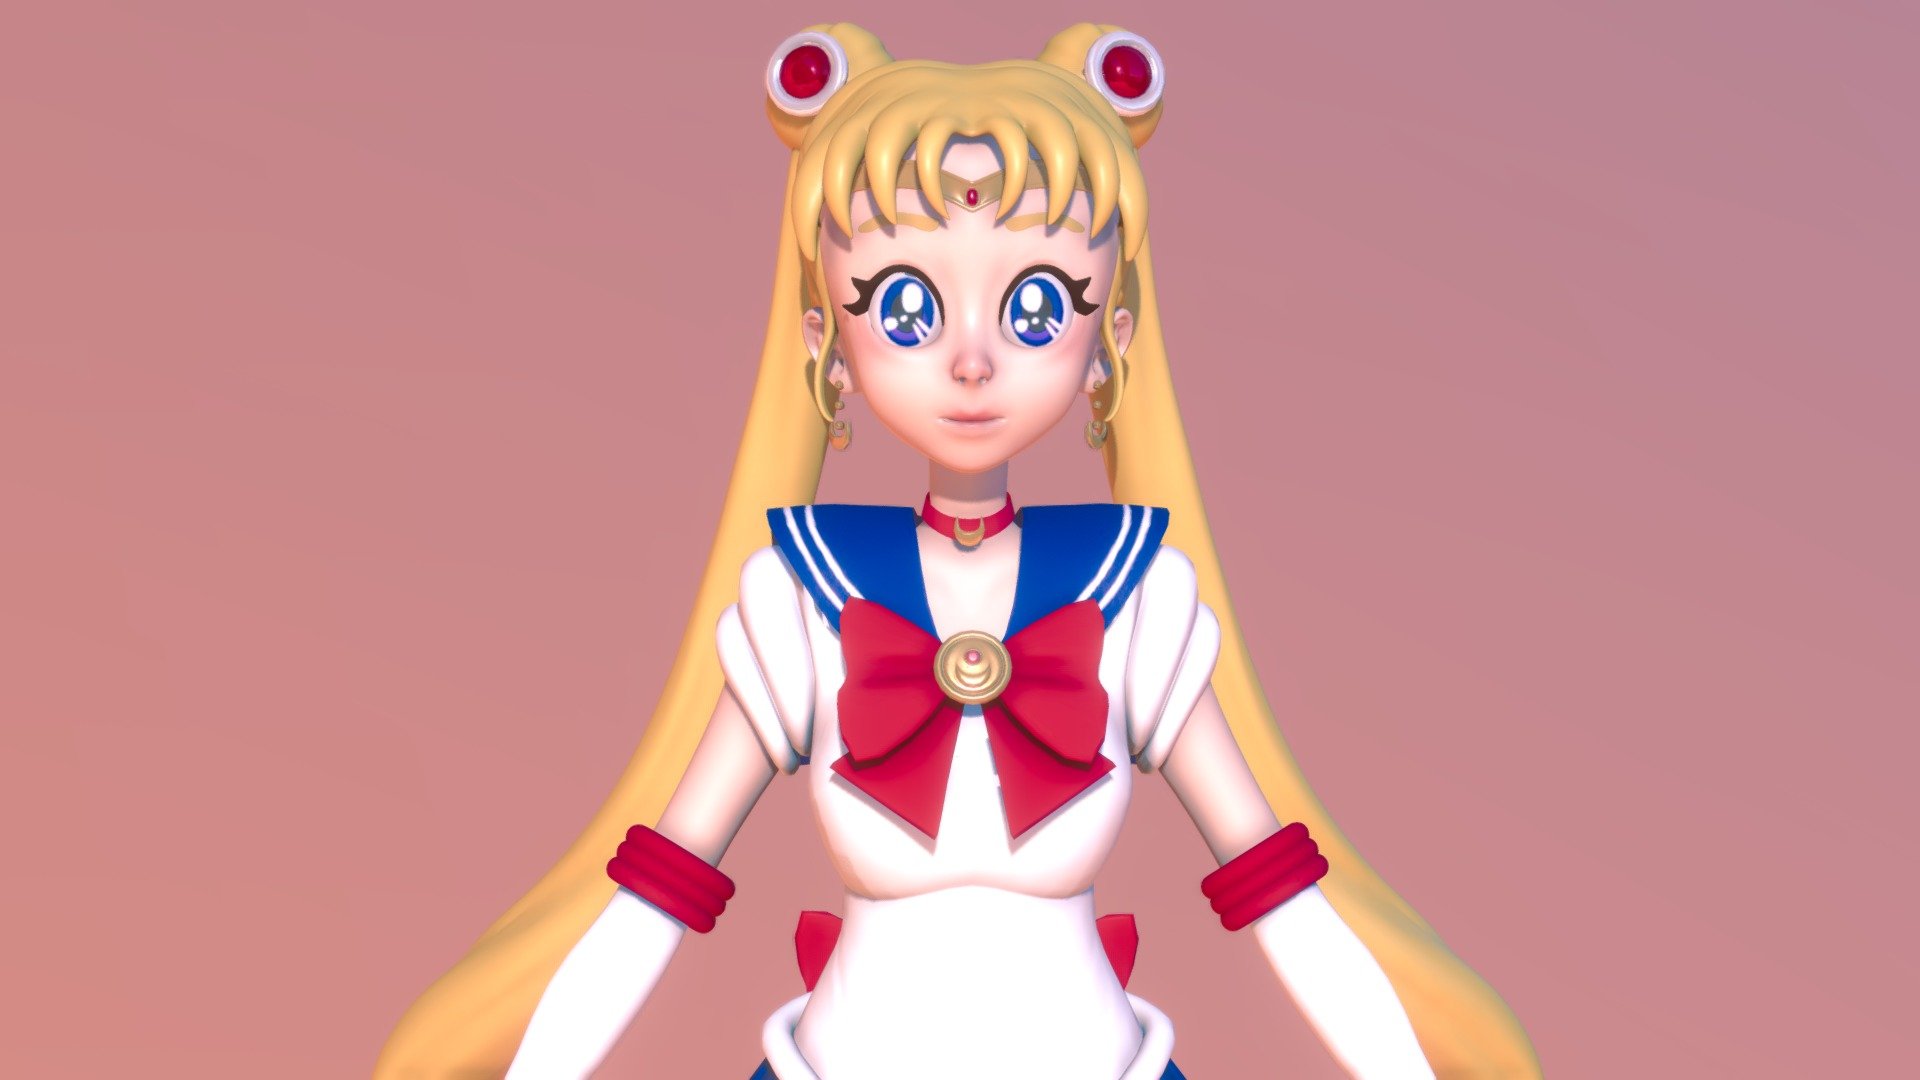 3D model of Sailor Moon made for 3d classes at ESPM-Rio - 2020.1 ♥️

Made with Maya and Zbrush 3d model